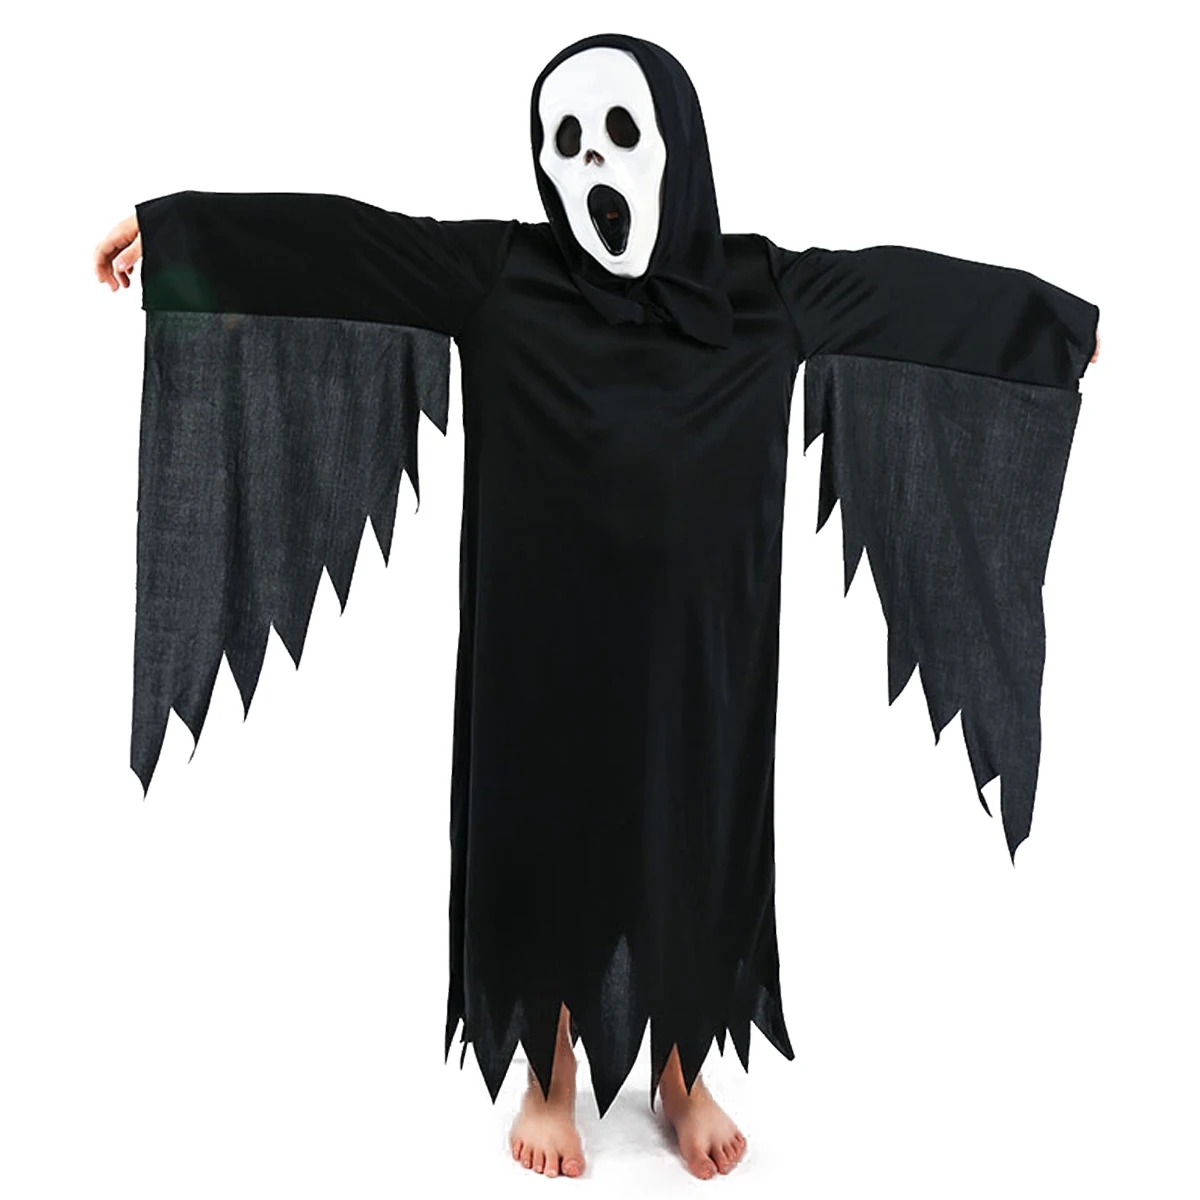 

Halloween Ghost Gown Costume Kids Black Creepy Phantom Dress Up Boys Halloween Scary Apparition Demon Cosplay Suit With Mask